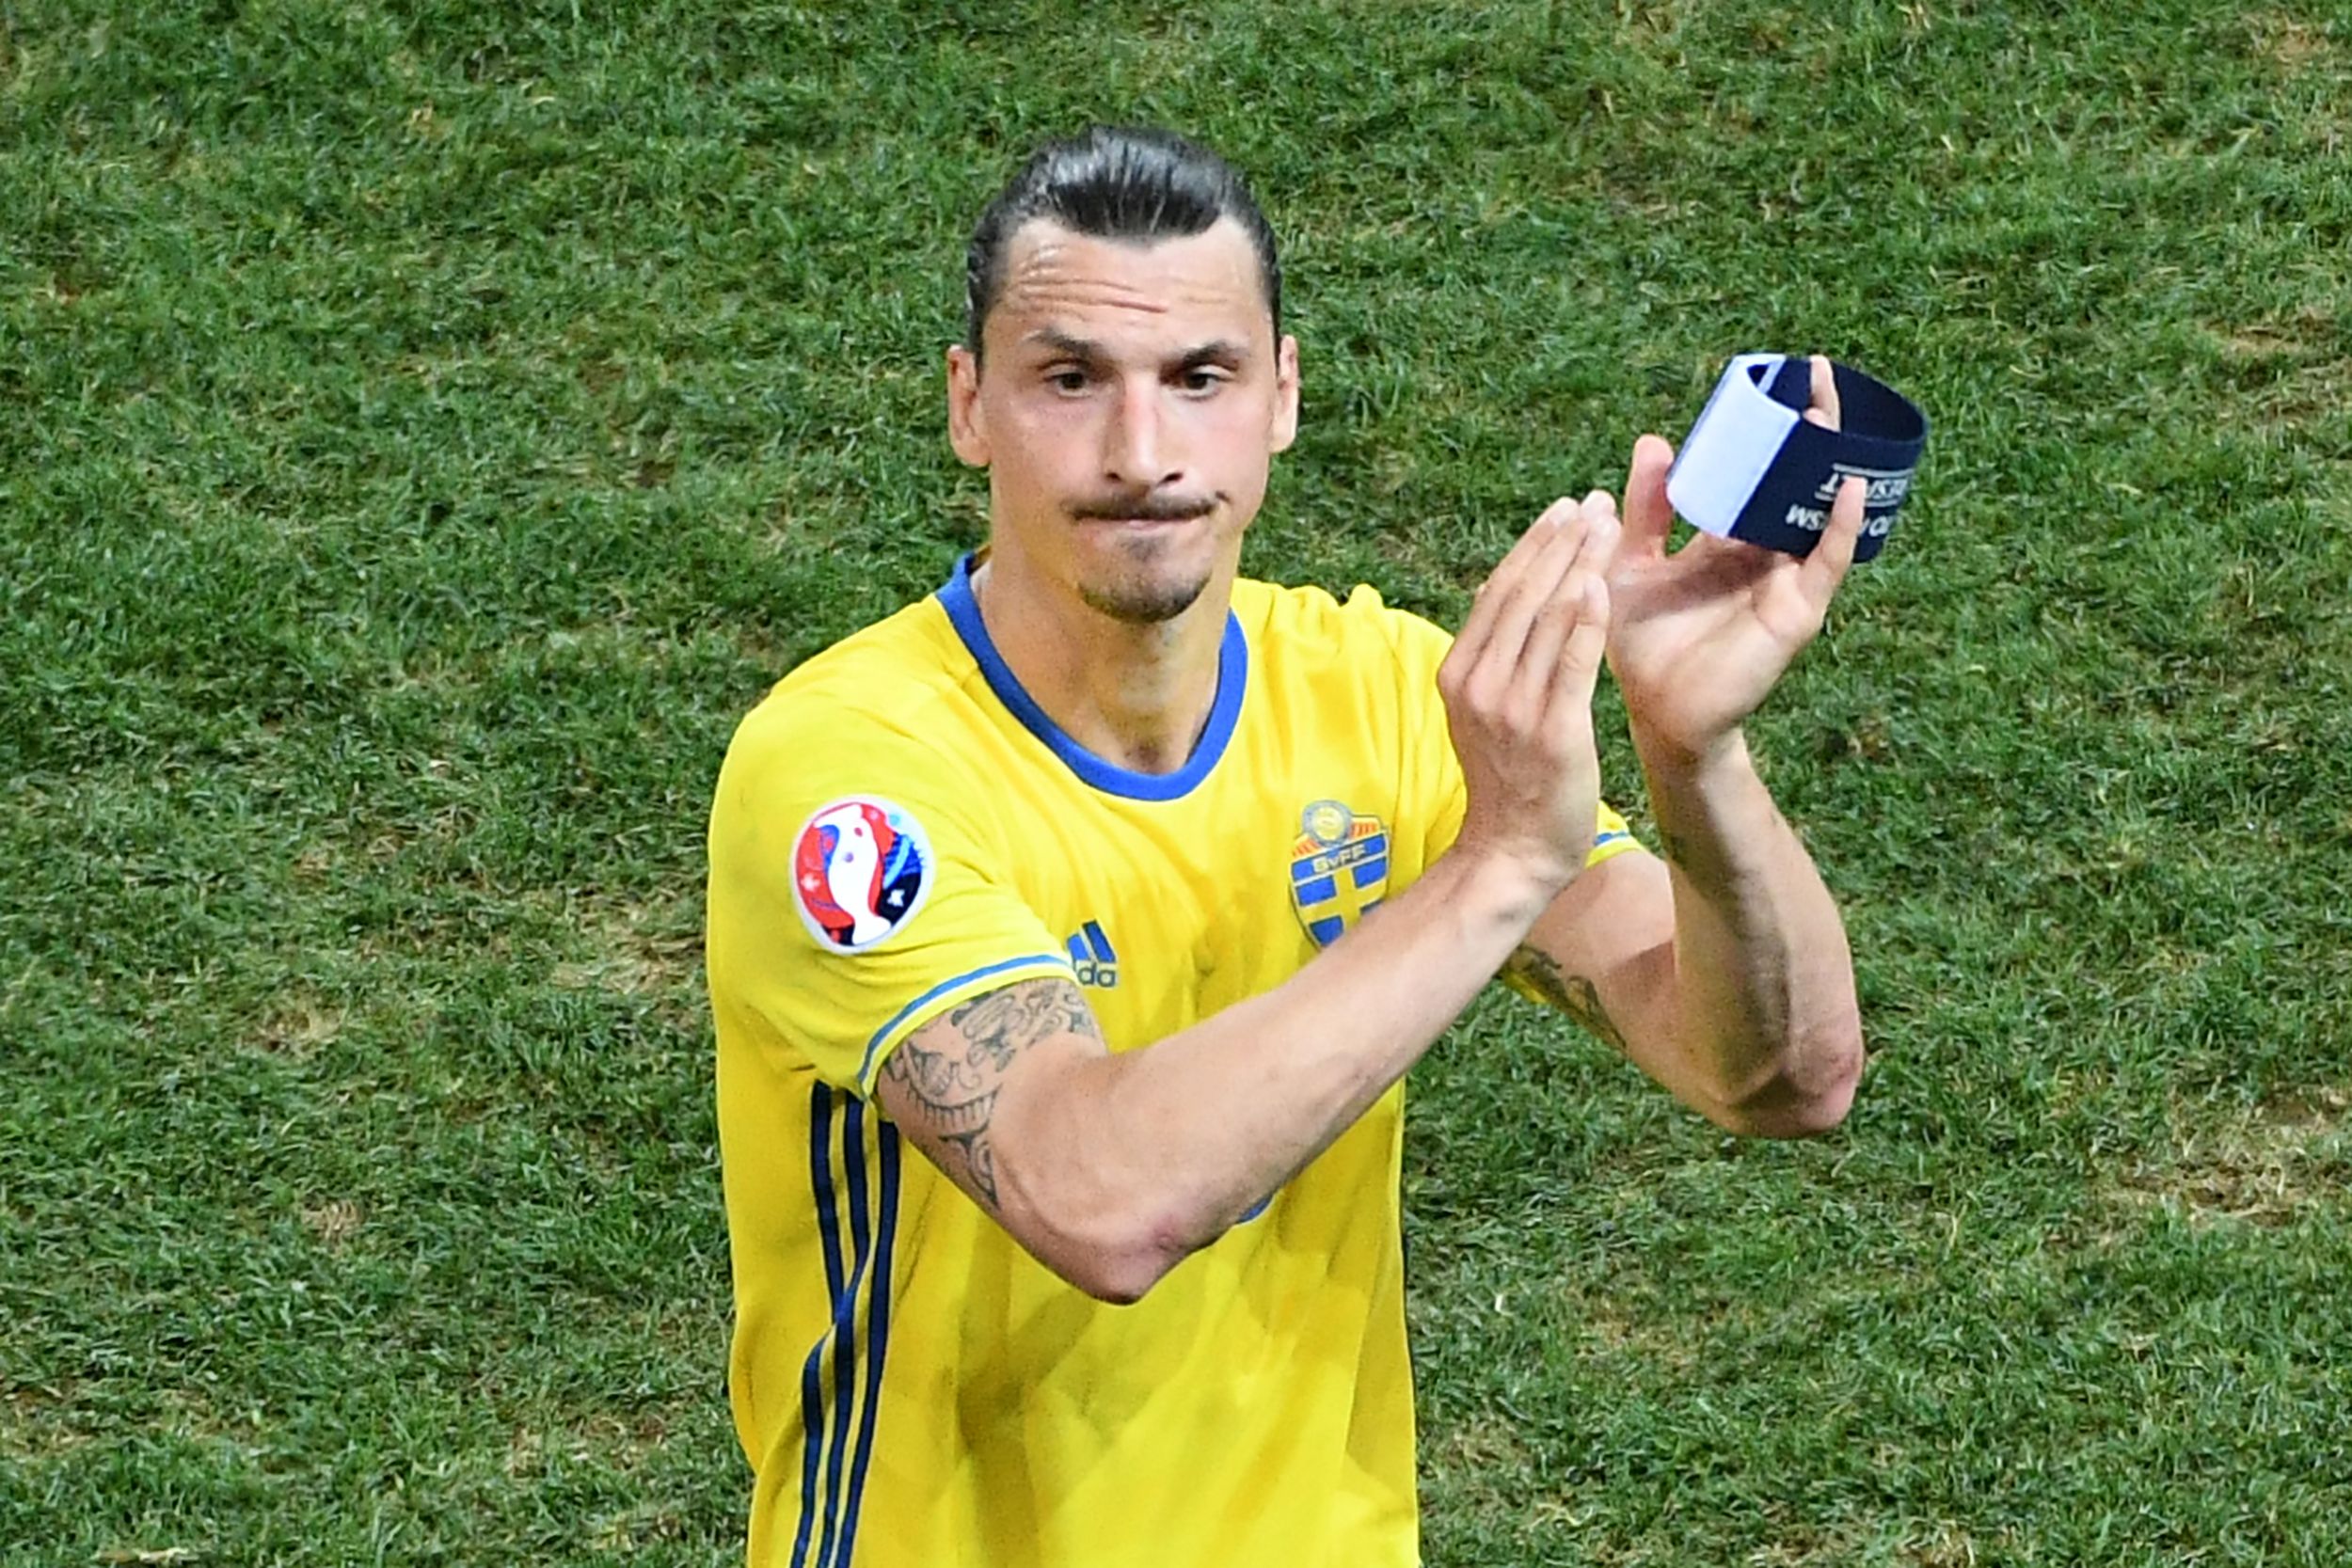 Football: Sweden's coach doubts they will find another Ibrahimovic